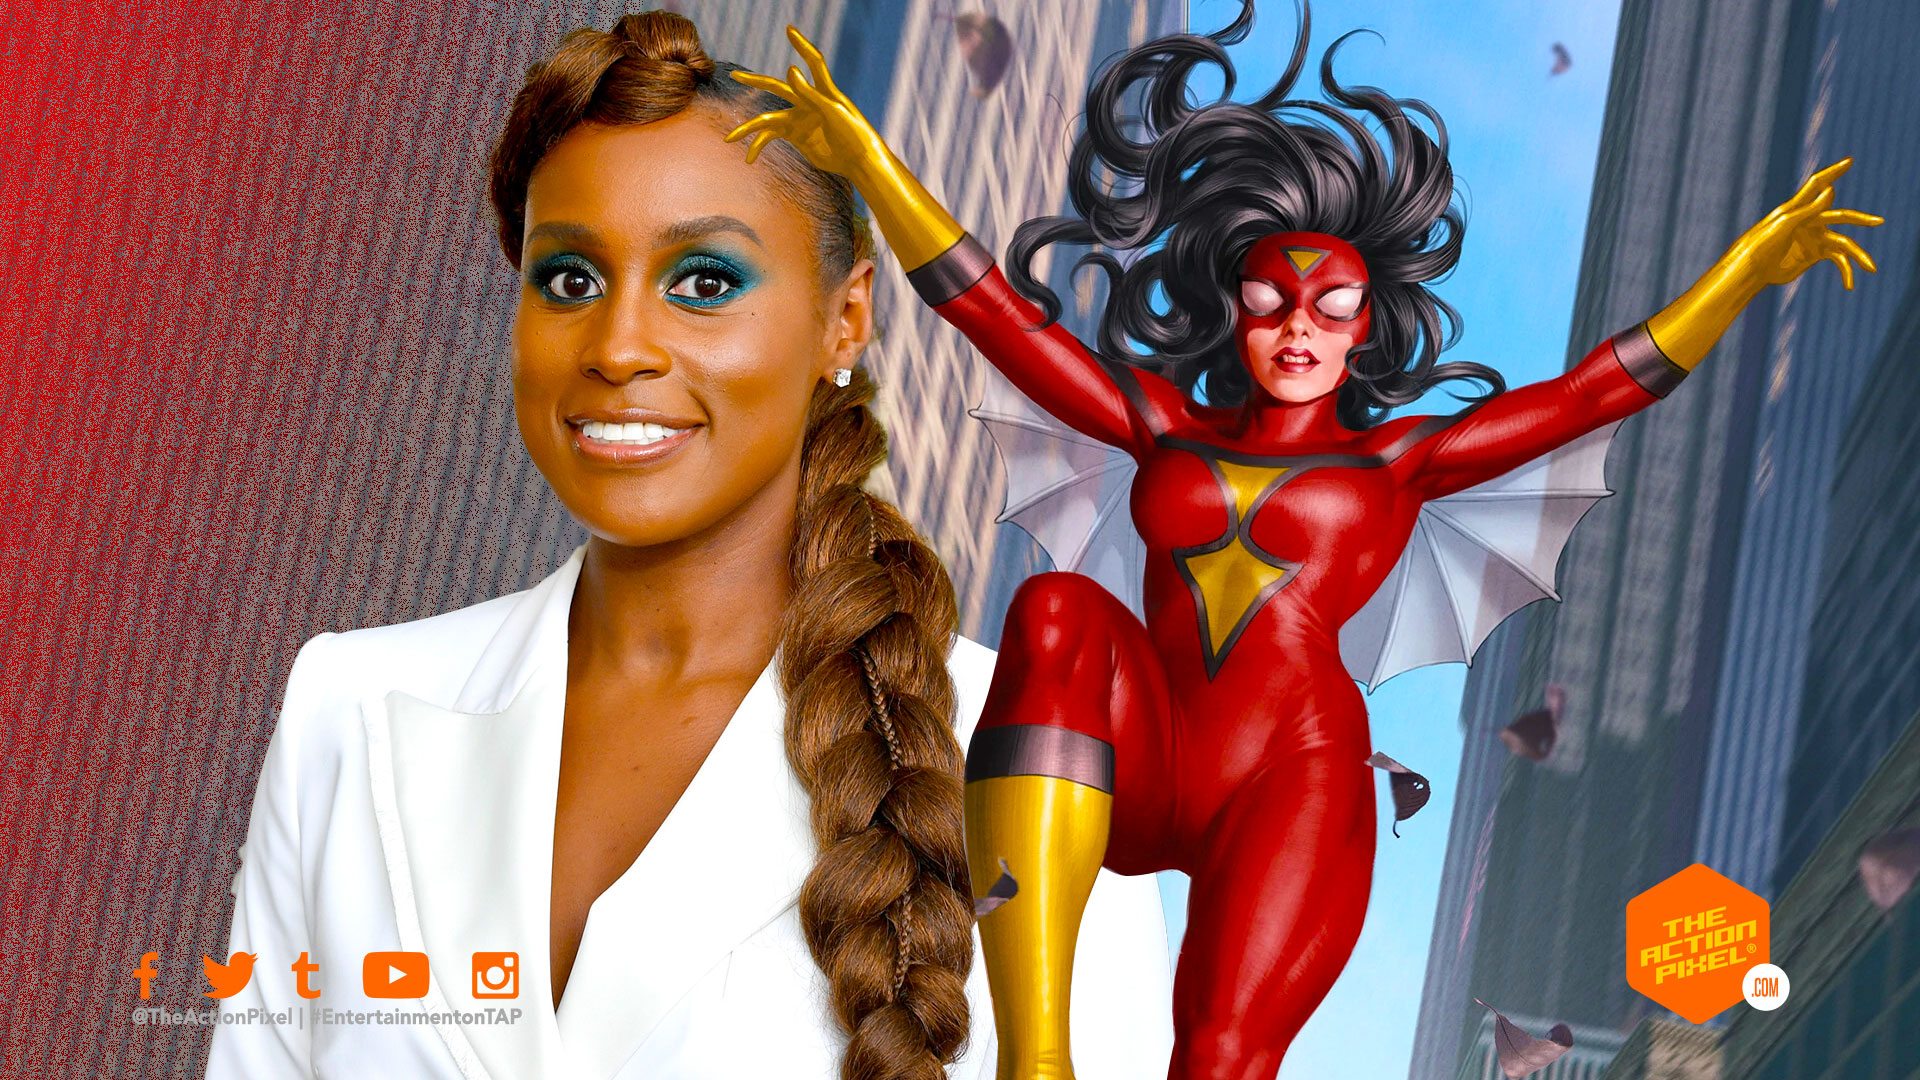 spider-woman, issa rae, spiderwoman,insecure, insecure actor, spider-man: into the spider-verse sequel, spider-verse 2, into the spider-verse 2, apider-verse sequel, spider-man: into the spider-verse sequel, jessica drew, issa rae, entertainment on tap, the action pixel, sony animation, sony pictures, marvel comics, marvel, spider-man, spiderman, featured,